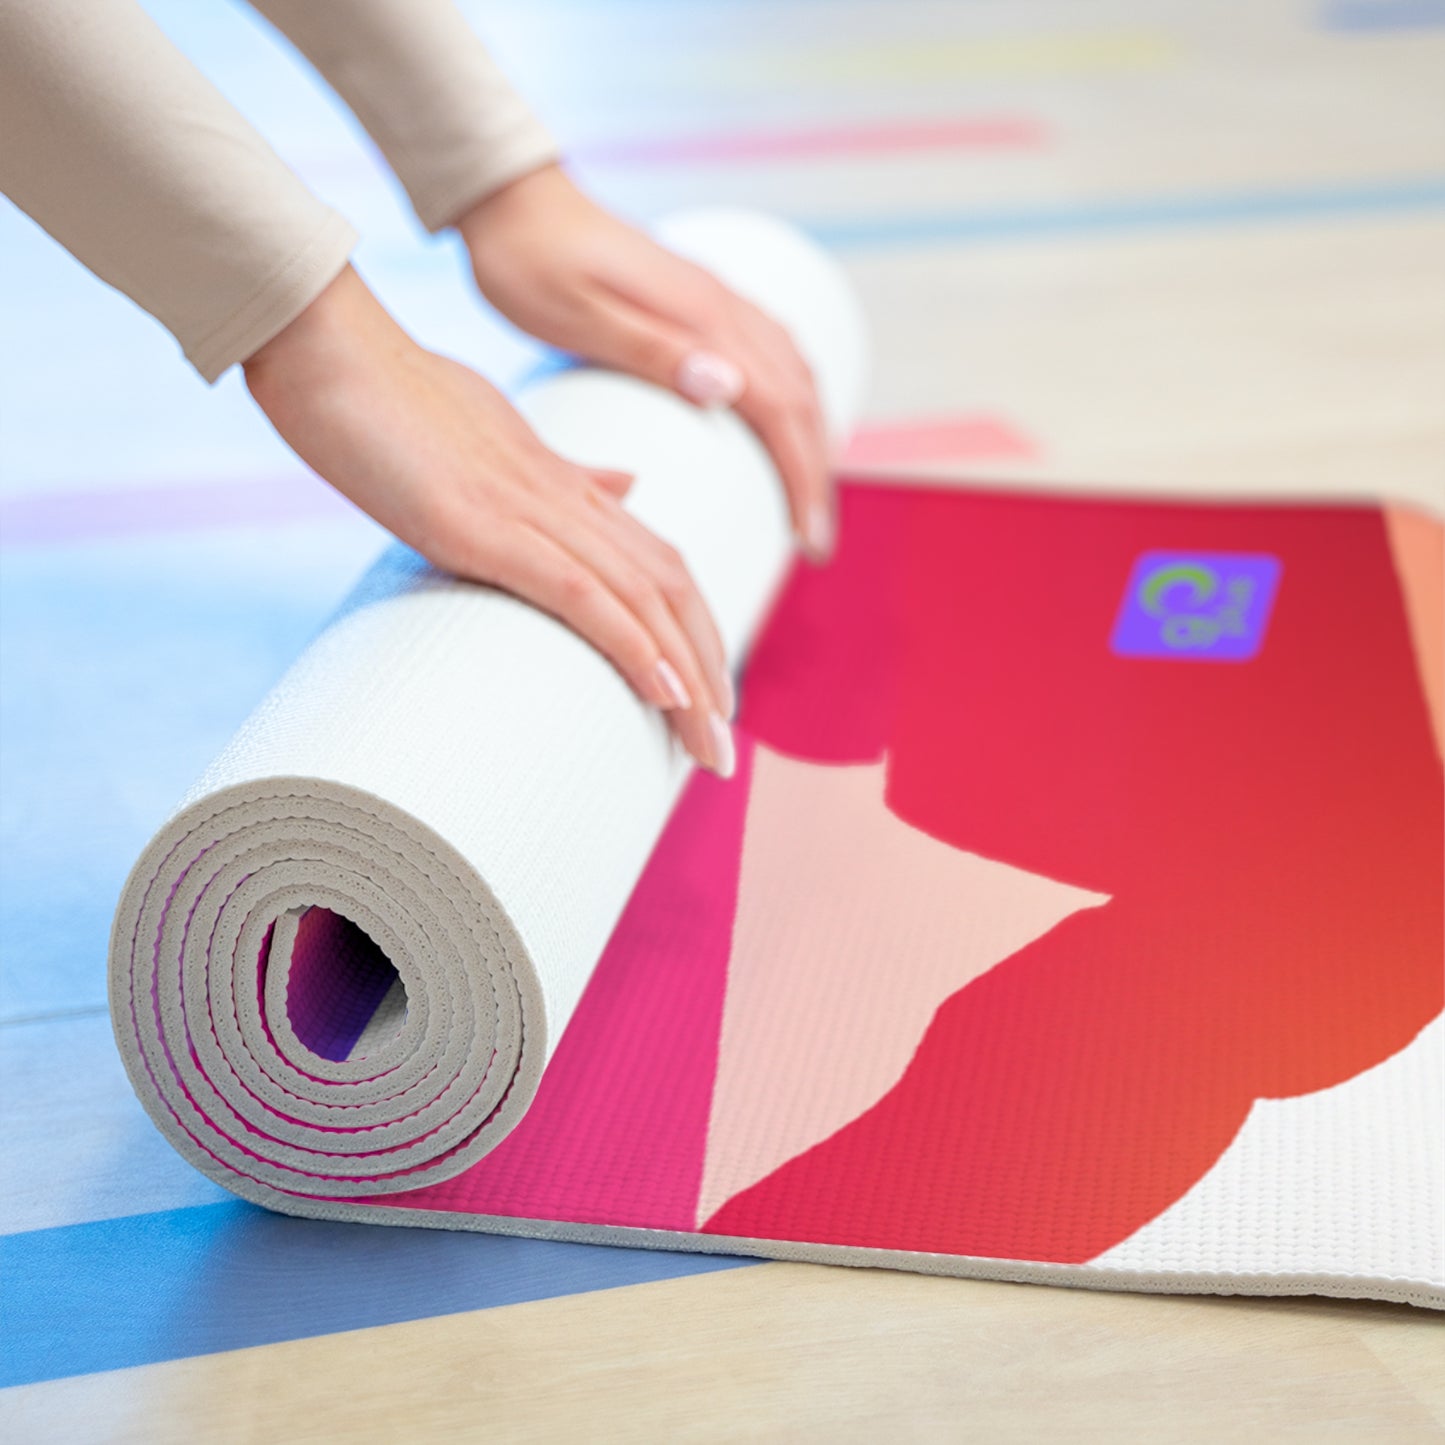 "The Athlete in Motion: A Colorful Geometric Masterpiece" - Go Plus Foam Yoga Mat